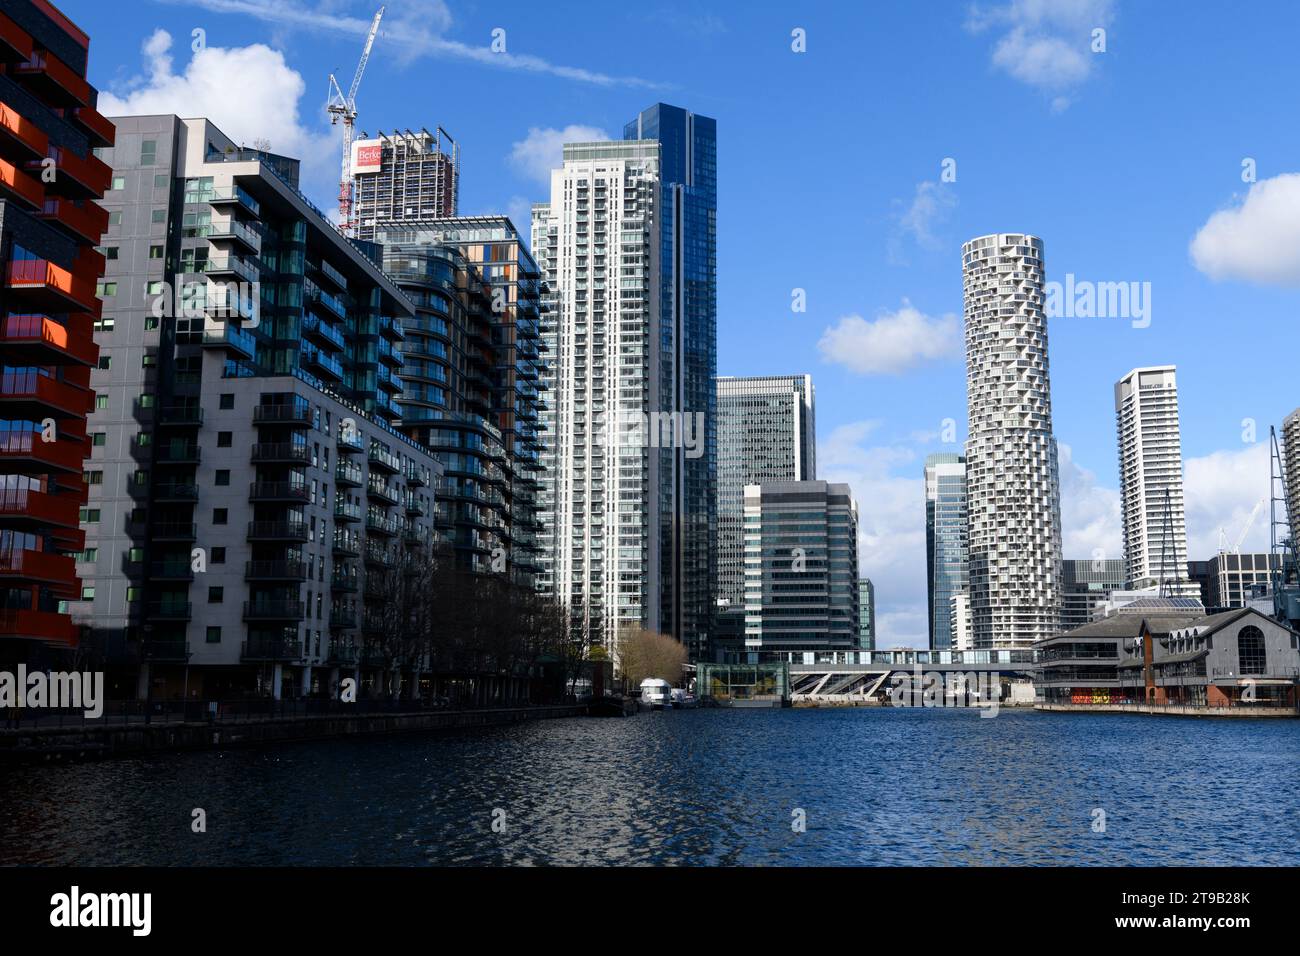 Looking North down Millwall Inner Dock, the white circular skyscraper is One Park Drive a residential skyscraper located in Canary Wharf. Millwall Inn Stock Photo